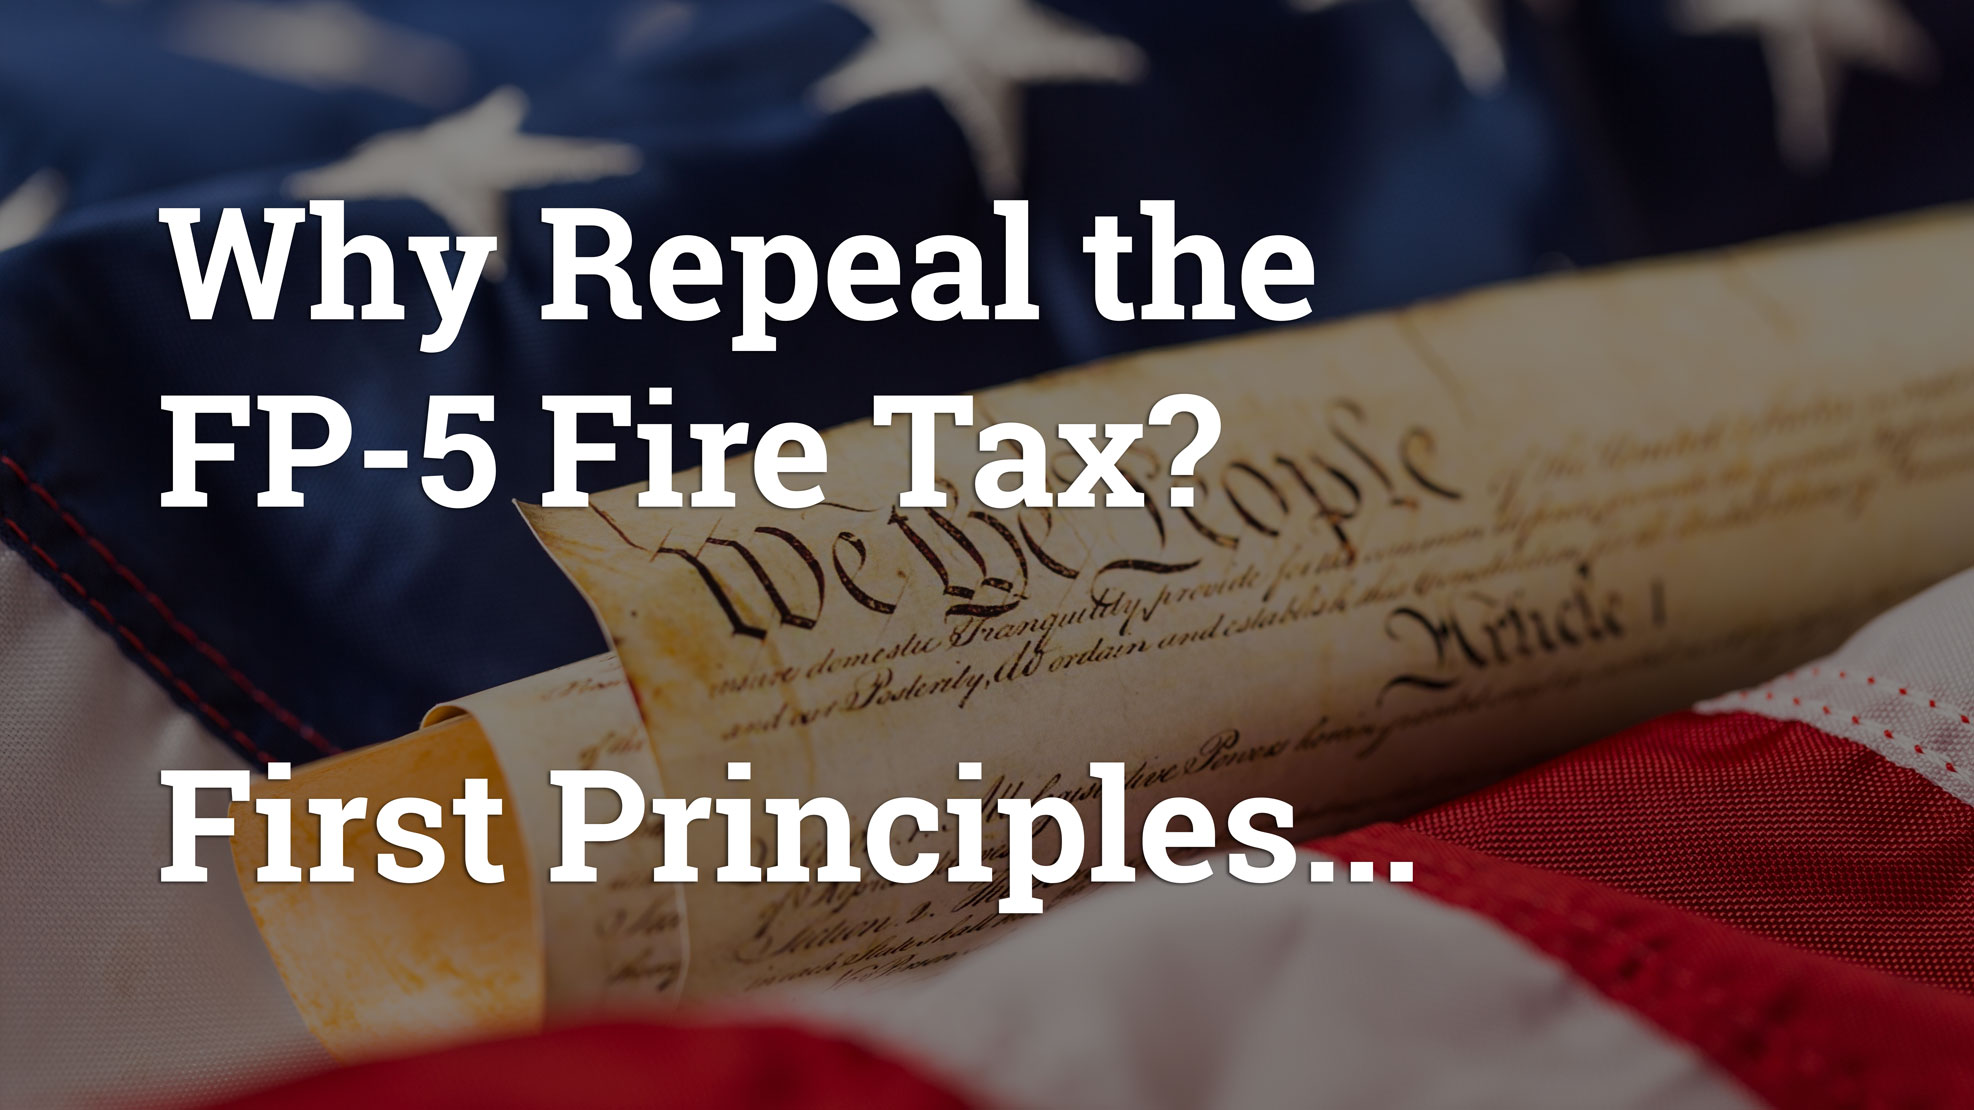 Why repeal the FP-5 fire tax? The first principles ...